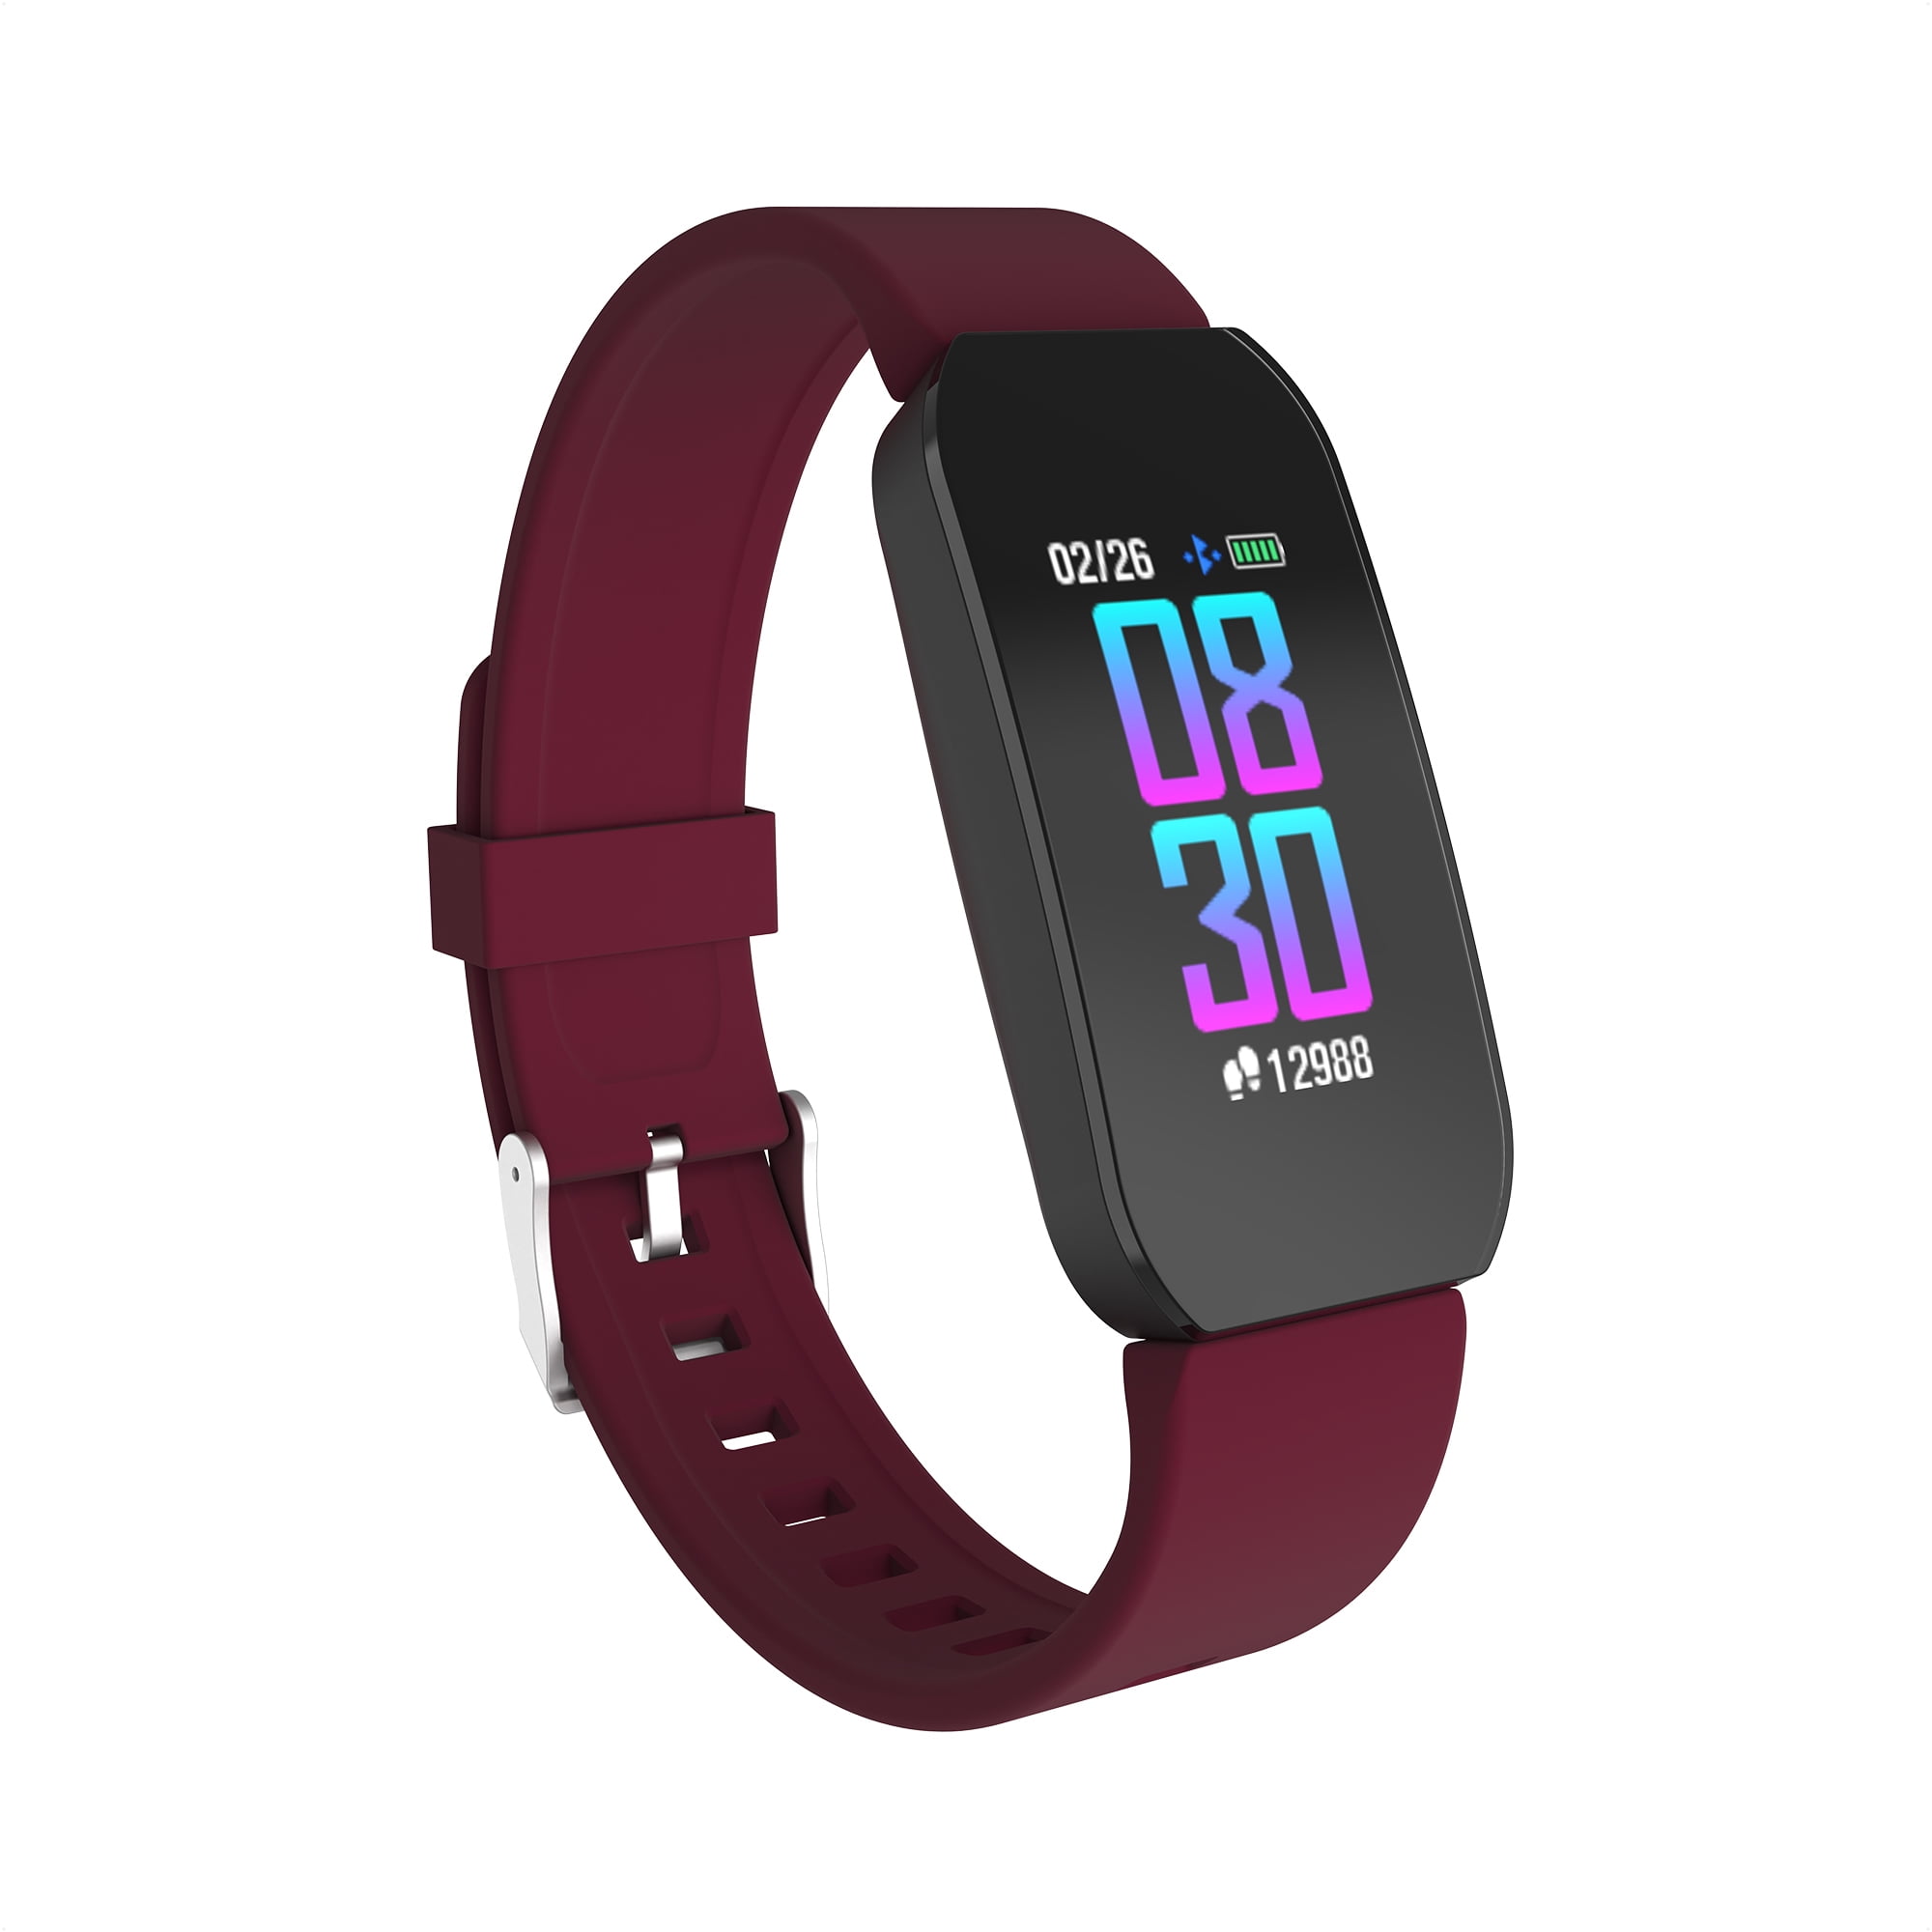 Smartwatch Calls FREE EXTRA STRAPS Fitness Tracker Heart Rate Android iOS HD UK 